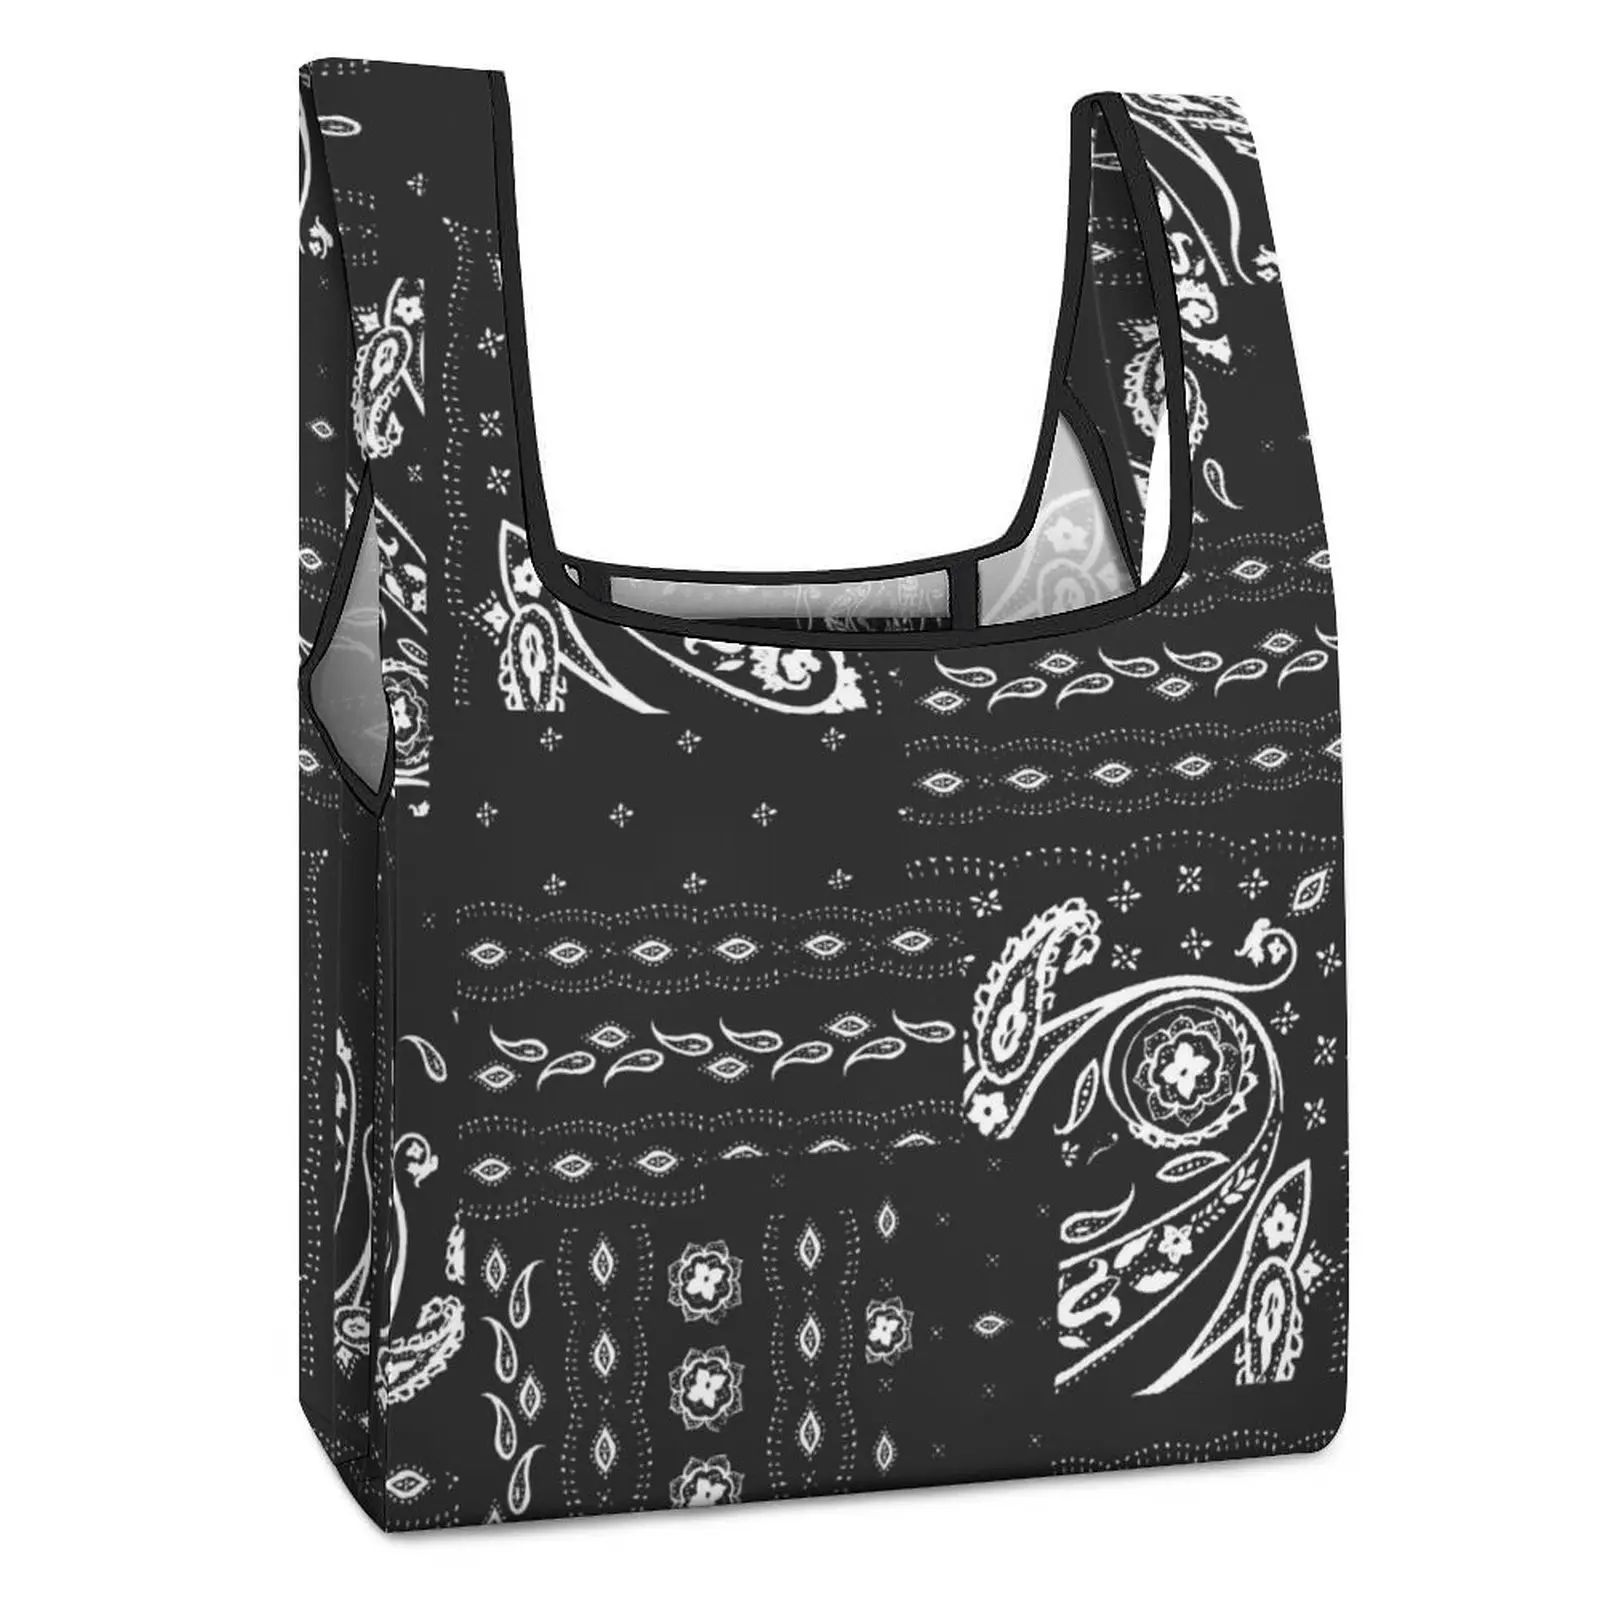 custom red lips black heels pattern shopping canvas bag women durable grocery shopper tote bags Customized Printed Shopping Bag Double Strap Handbag Black Unique Decor Tote Casual Woman Grocery Bag Custom Pattern